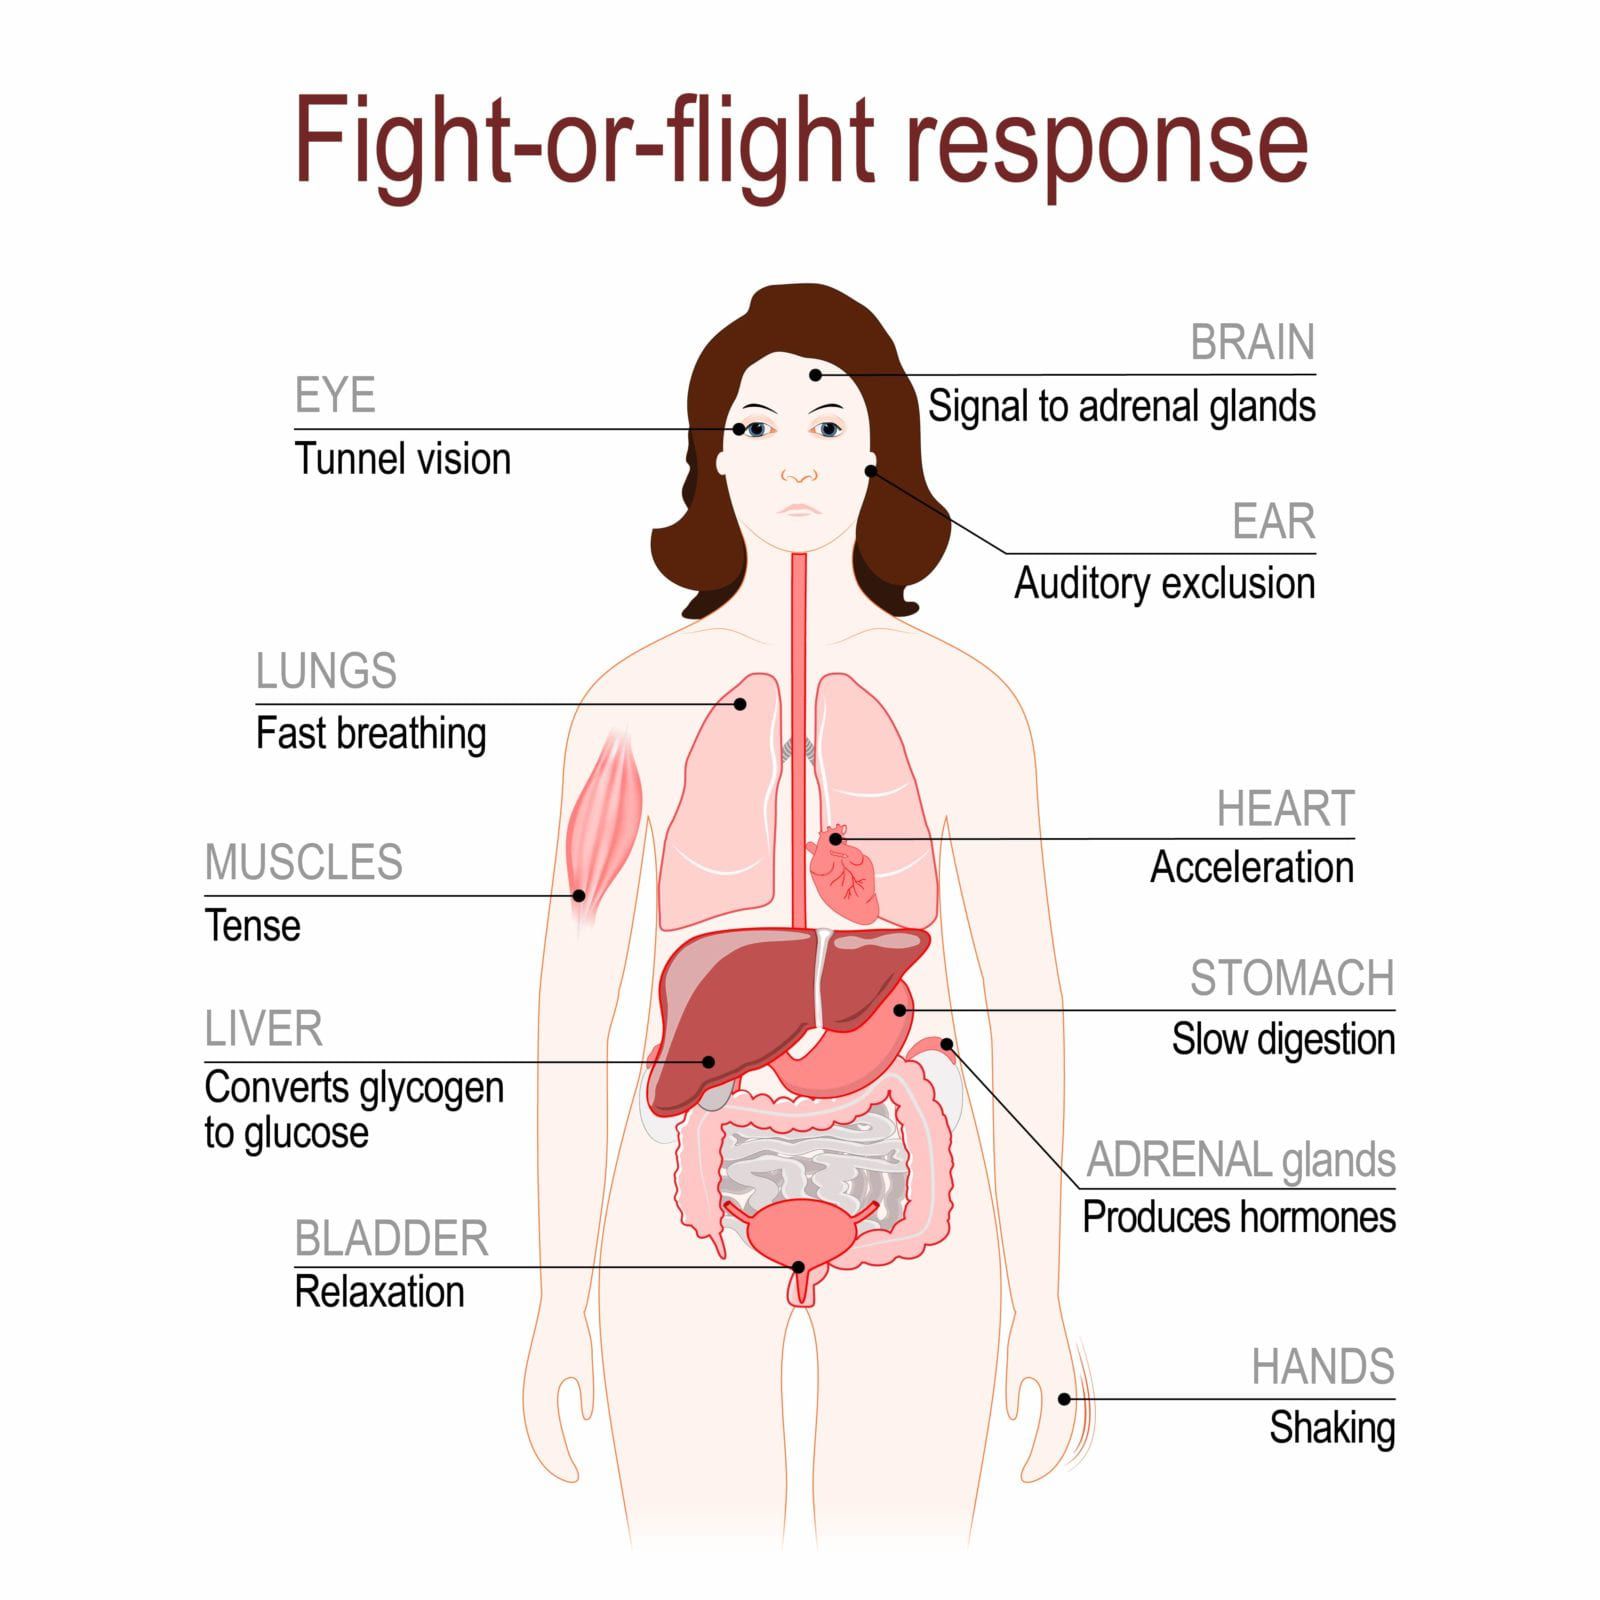 what is the menstrual cycle duration and can it affect an early period or an irregular peroid. cortisol controls our fight or flight response